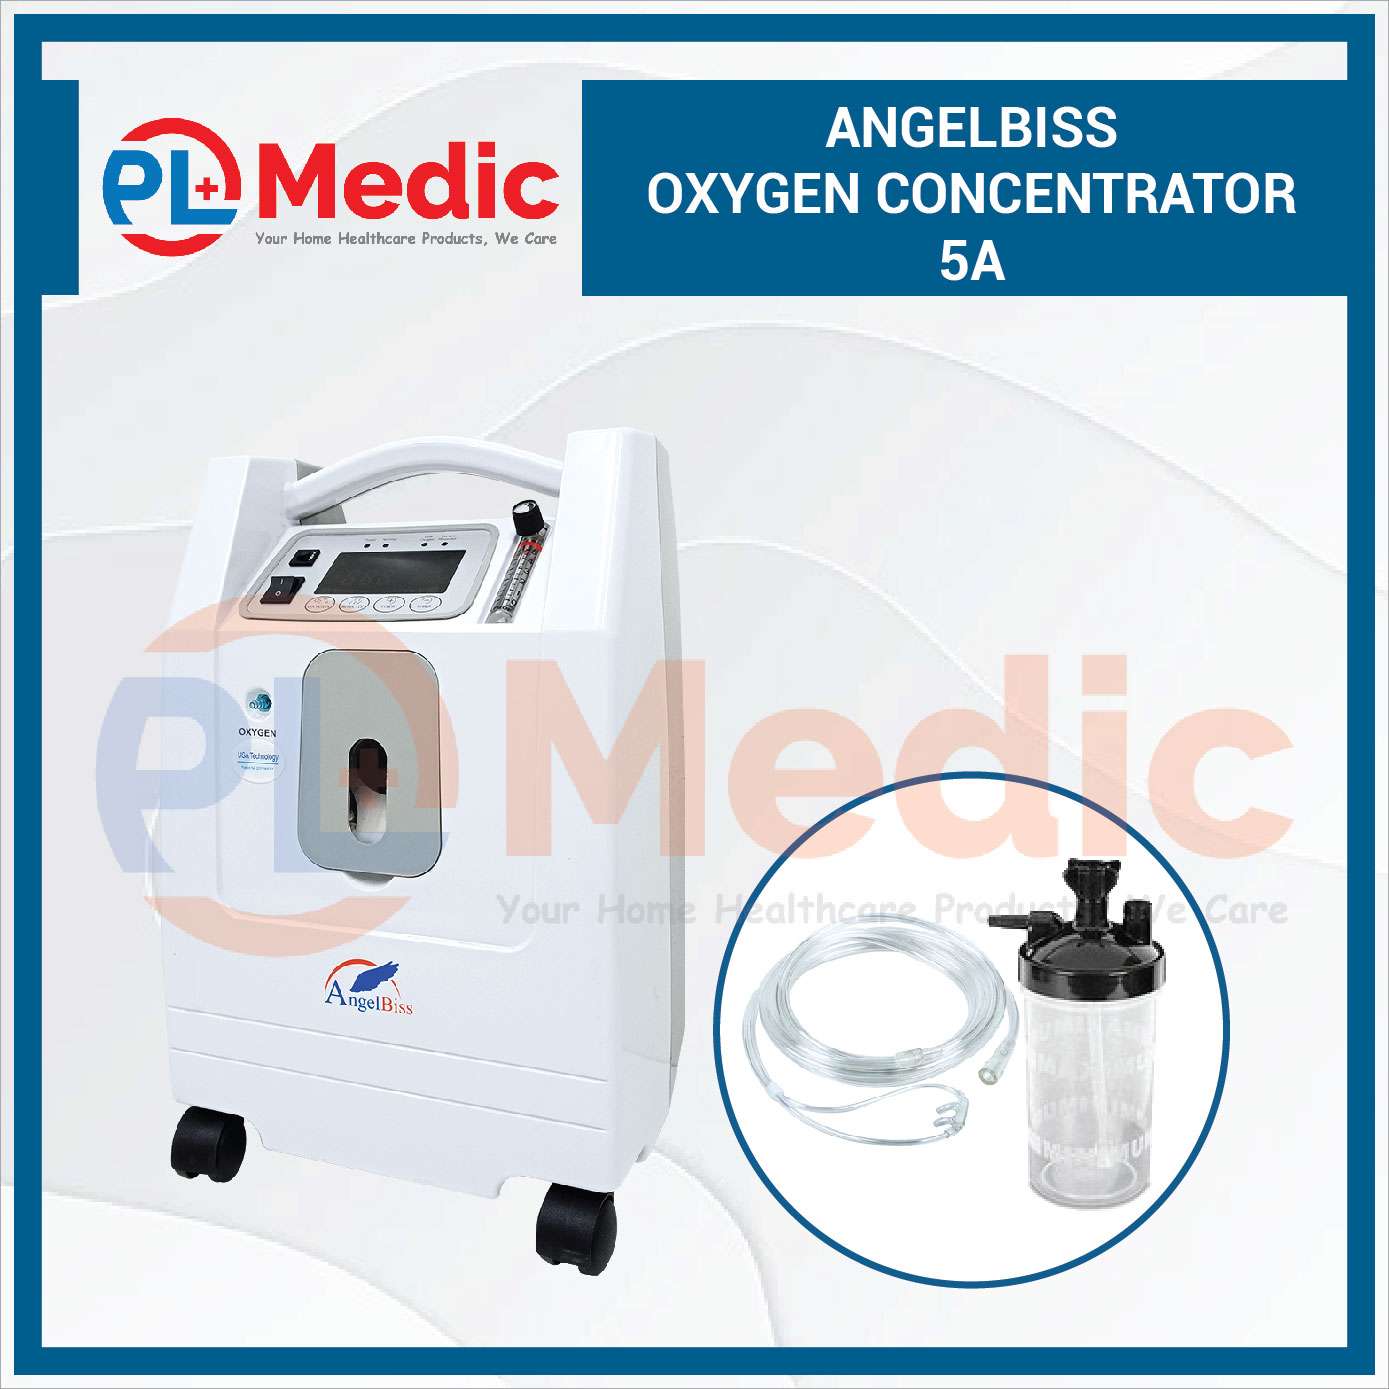 Angelbiss Oxygen Concentrator PL Science Medic